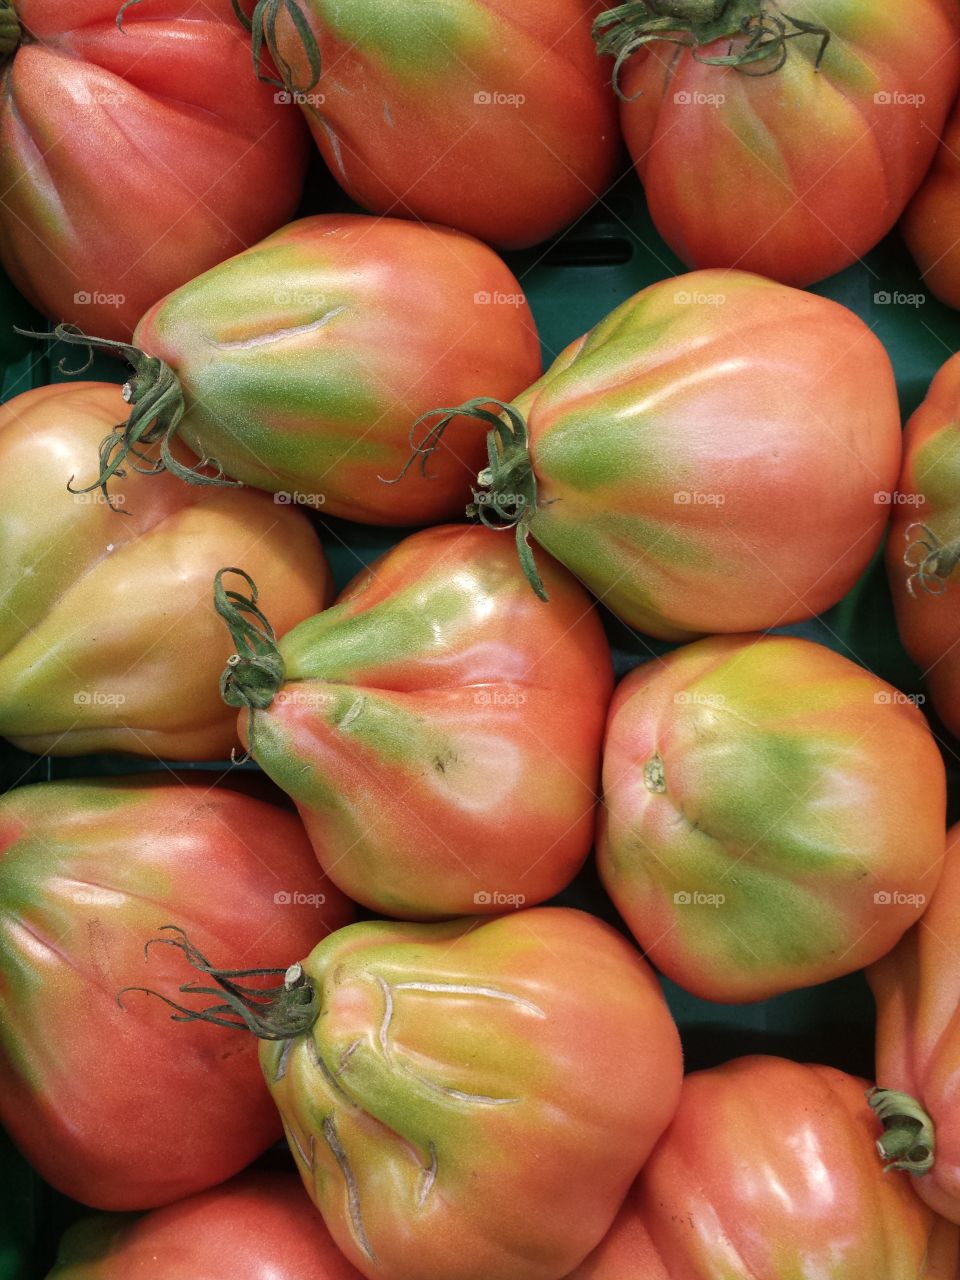 Overhead view of tomatoes